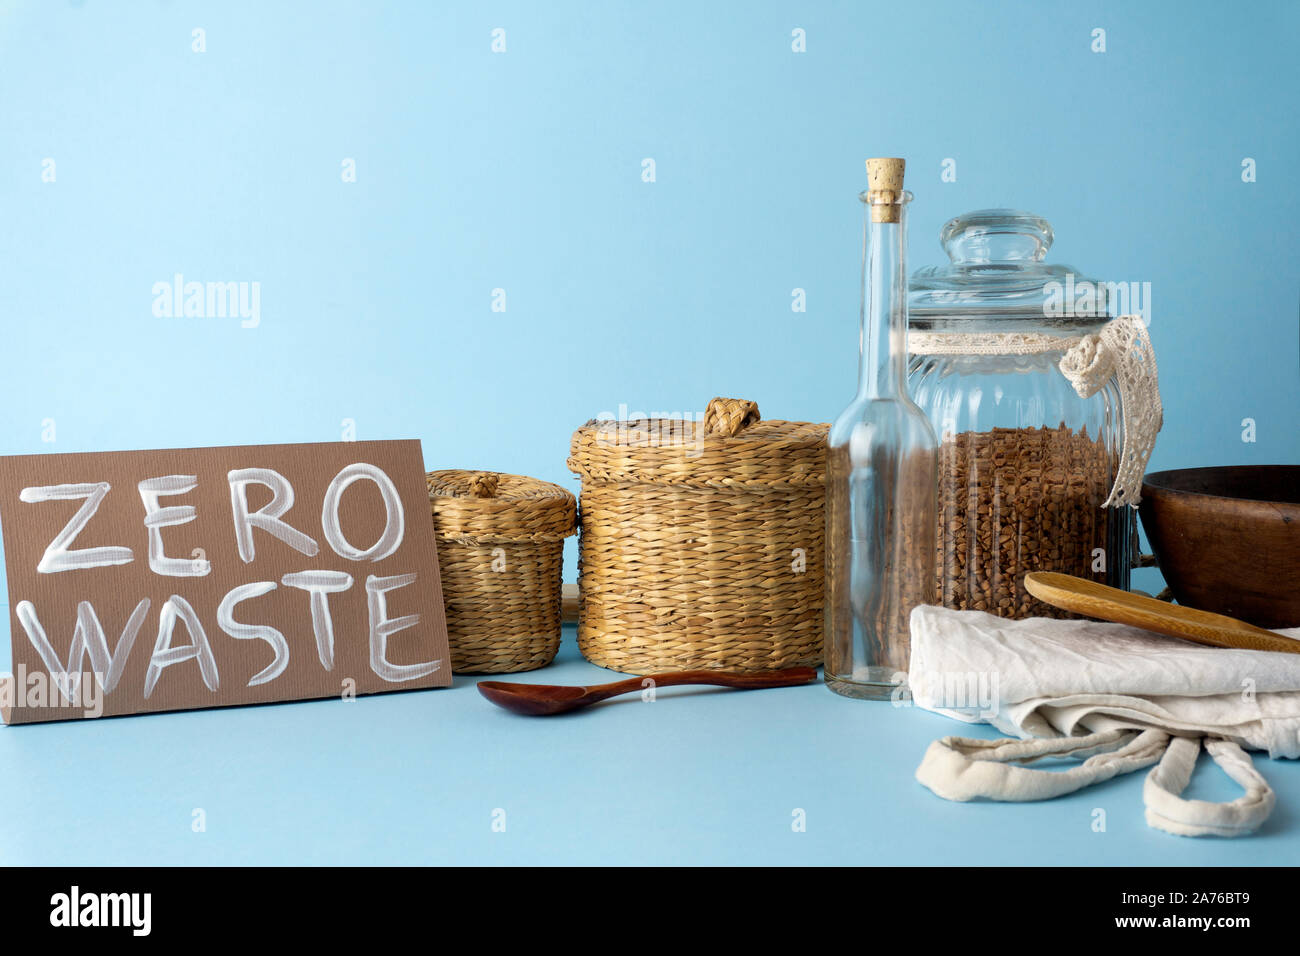 Zero waste concept. Reusable household items (cans, plates, bags). Environmental movement to reduce plastic waste. Stock Photo